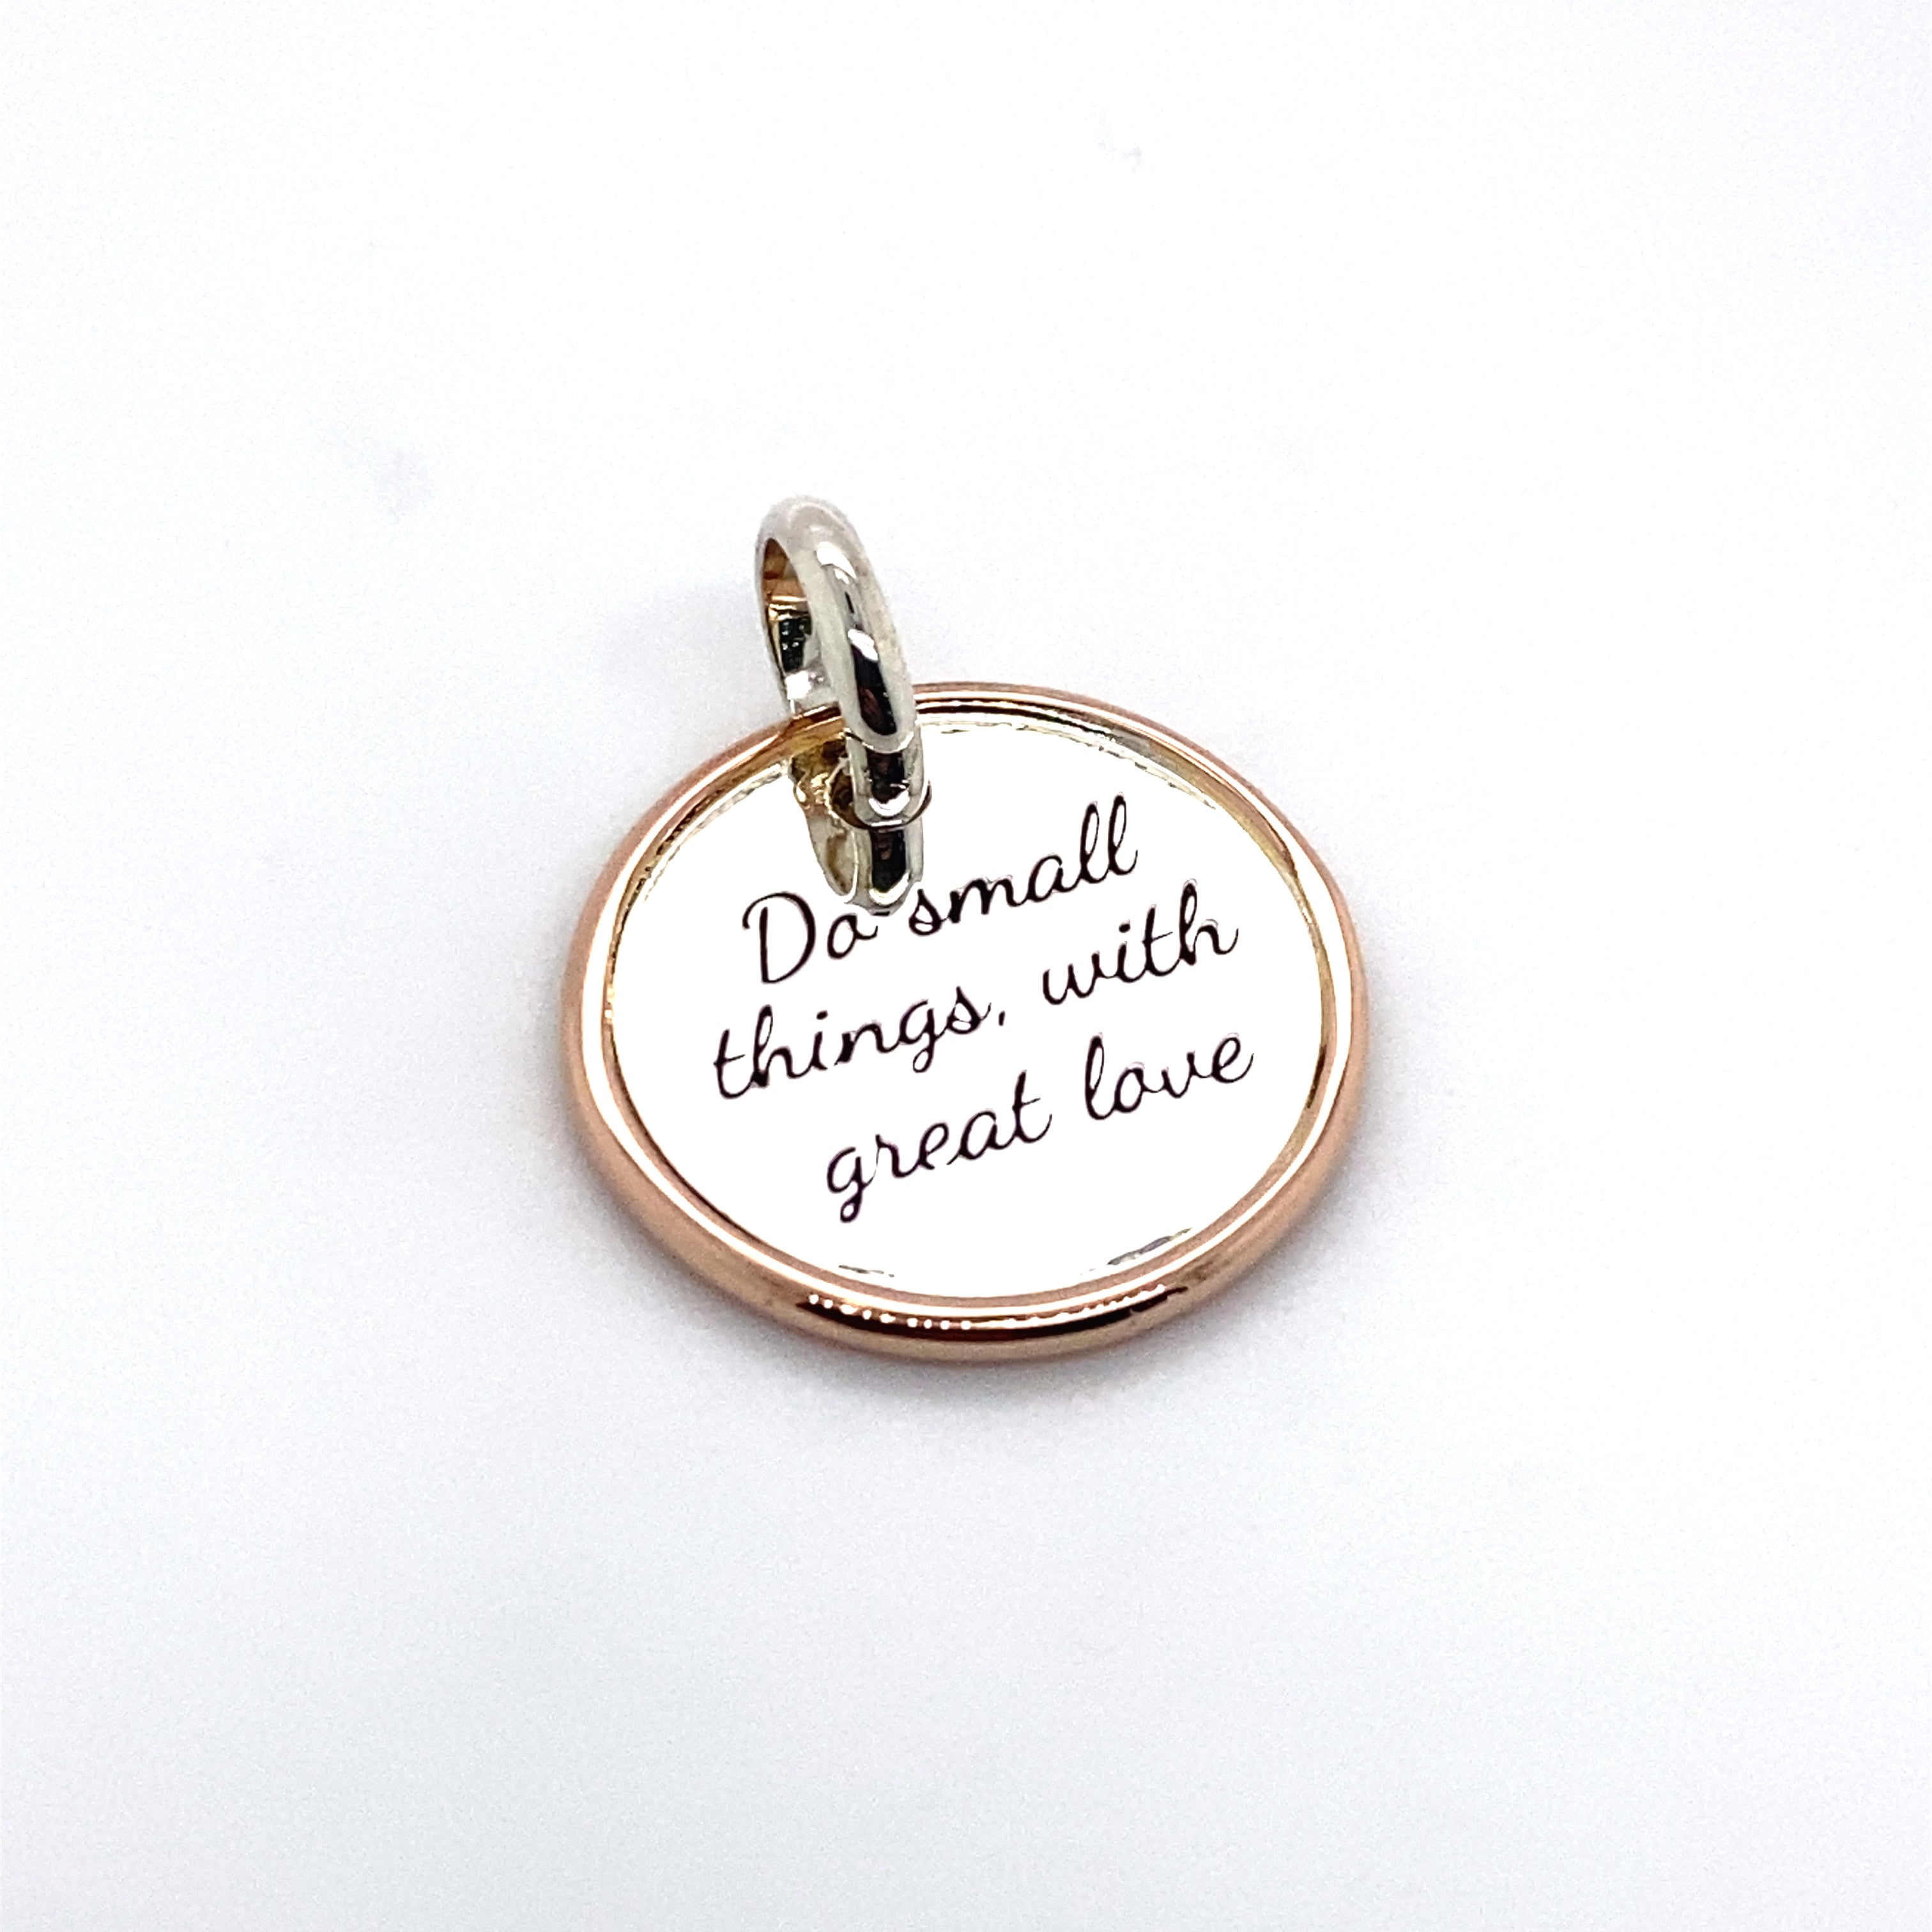 do small things with great love pendant charm